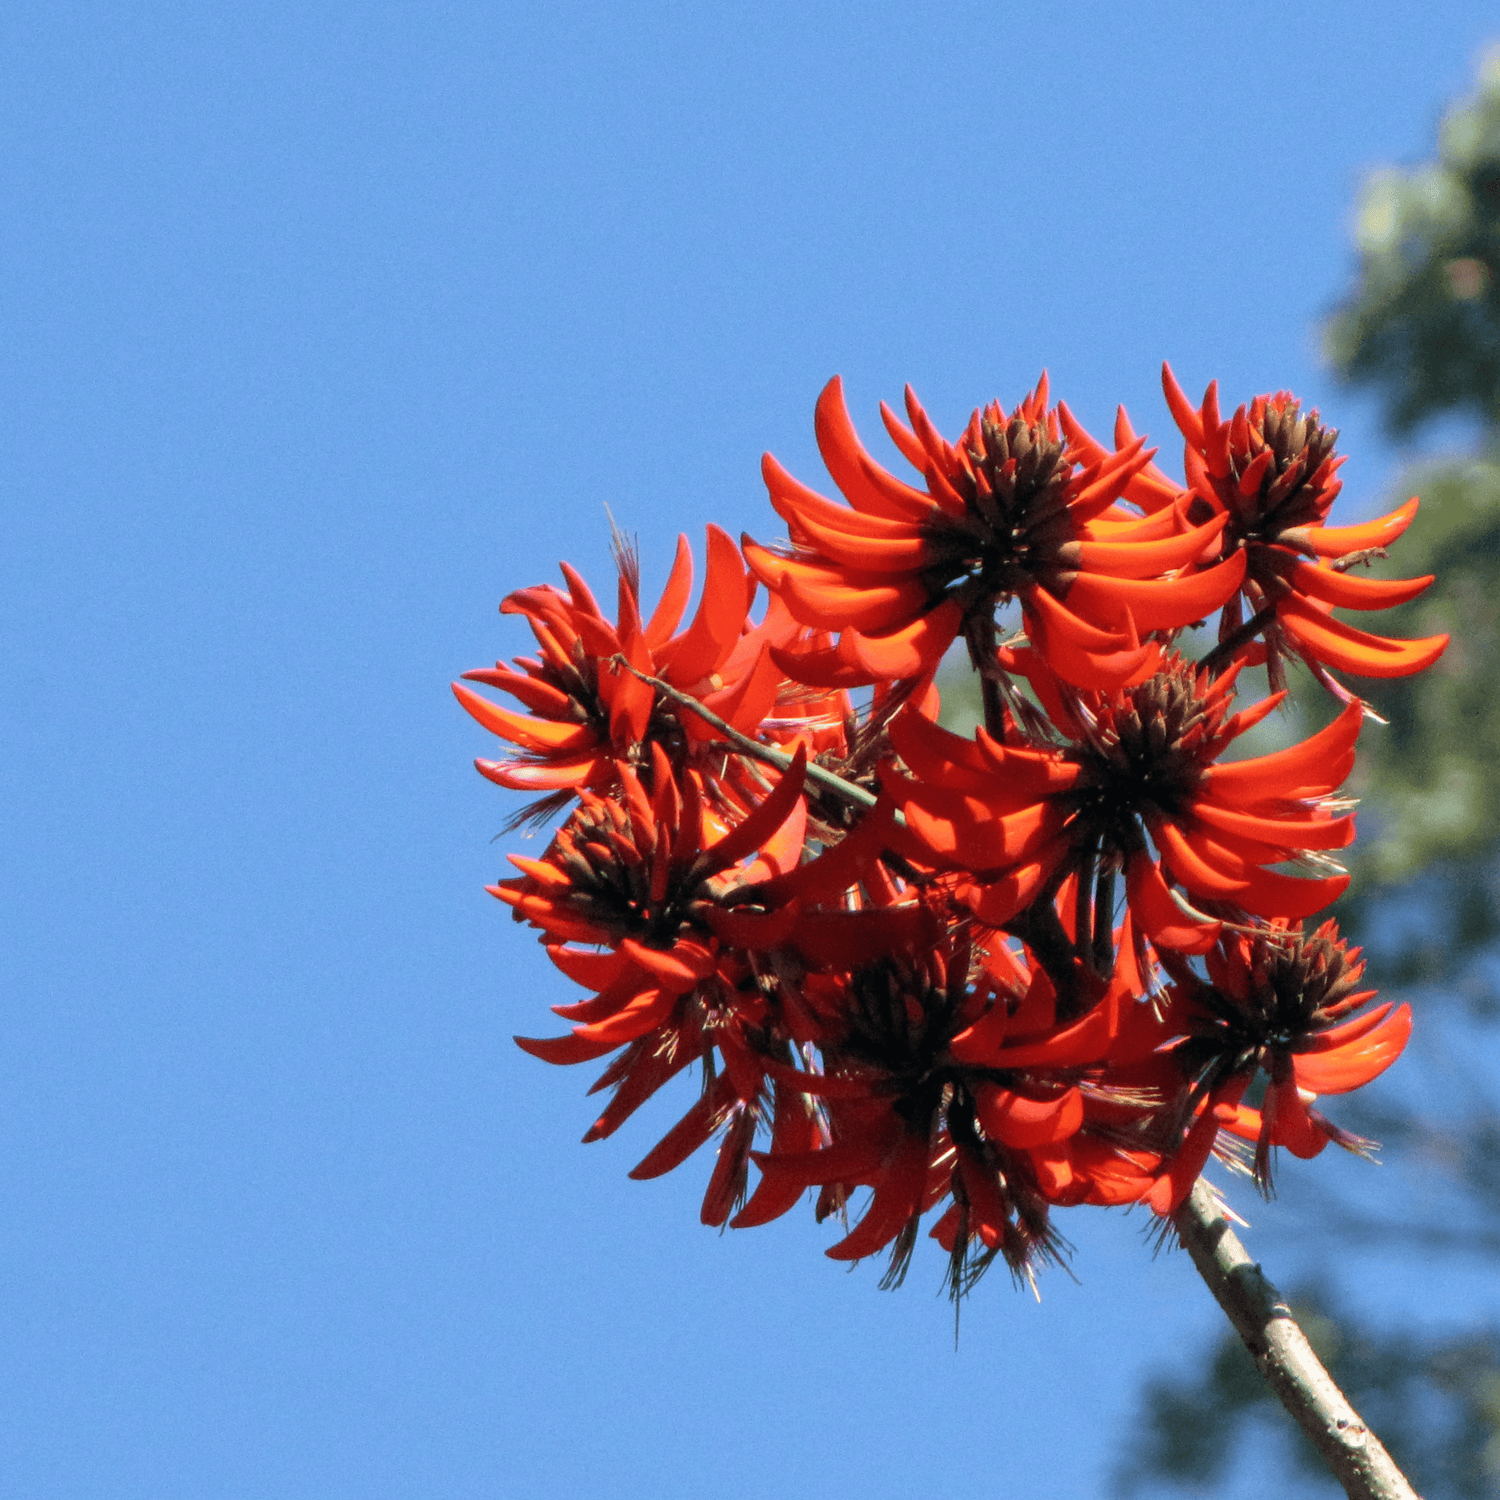 Himalayan Coral Tree (Erythrina arborescens) Flowering Live Plant